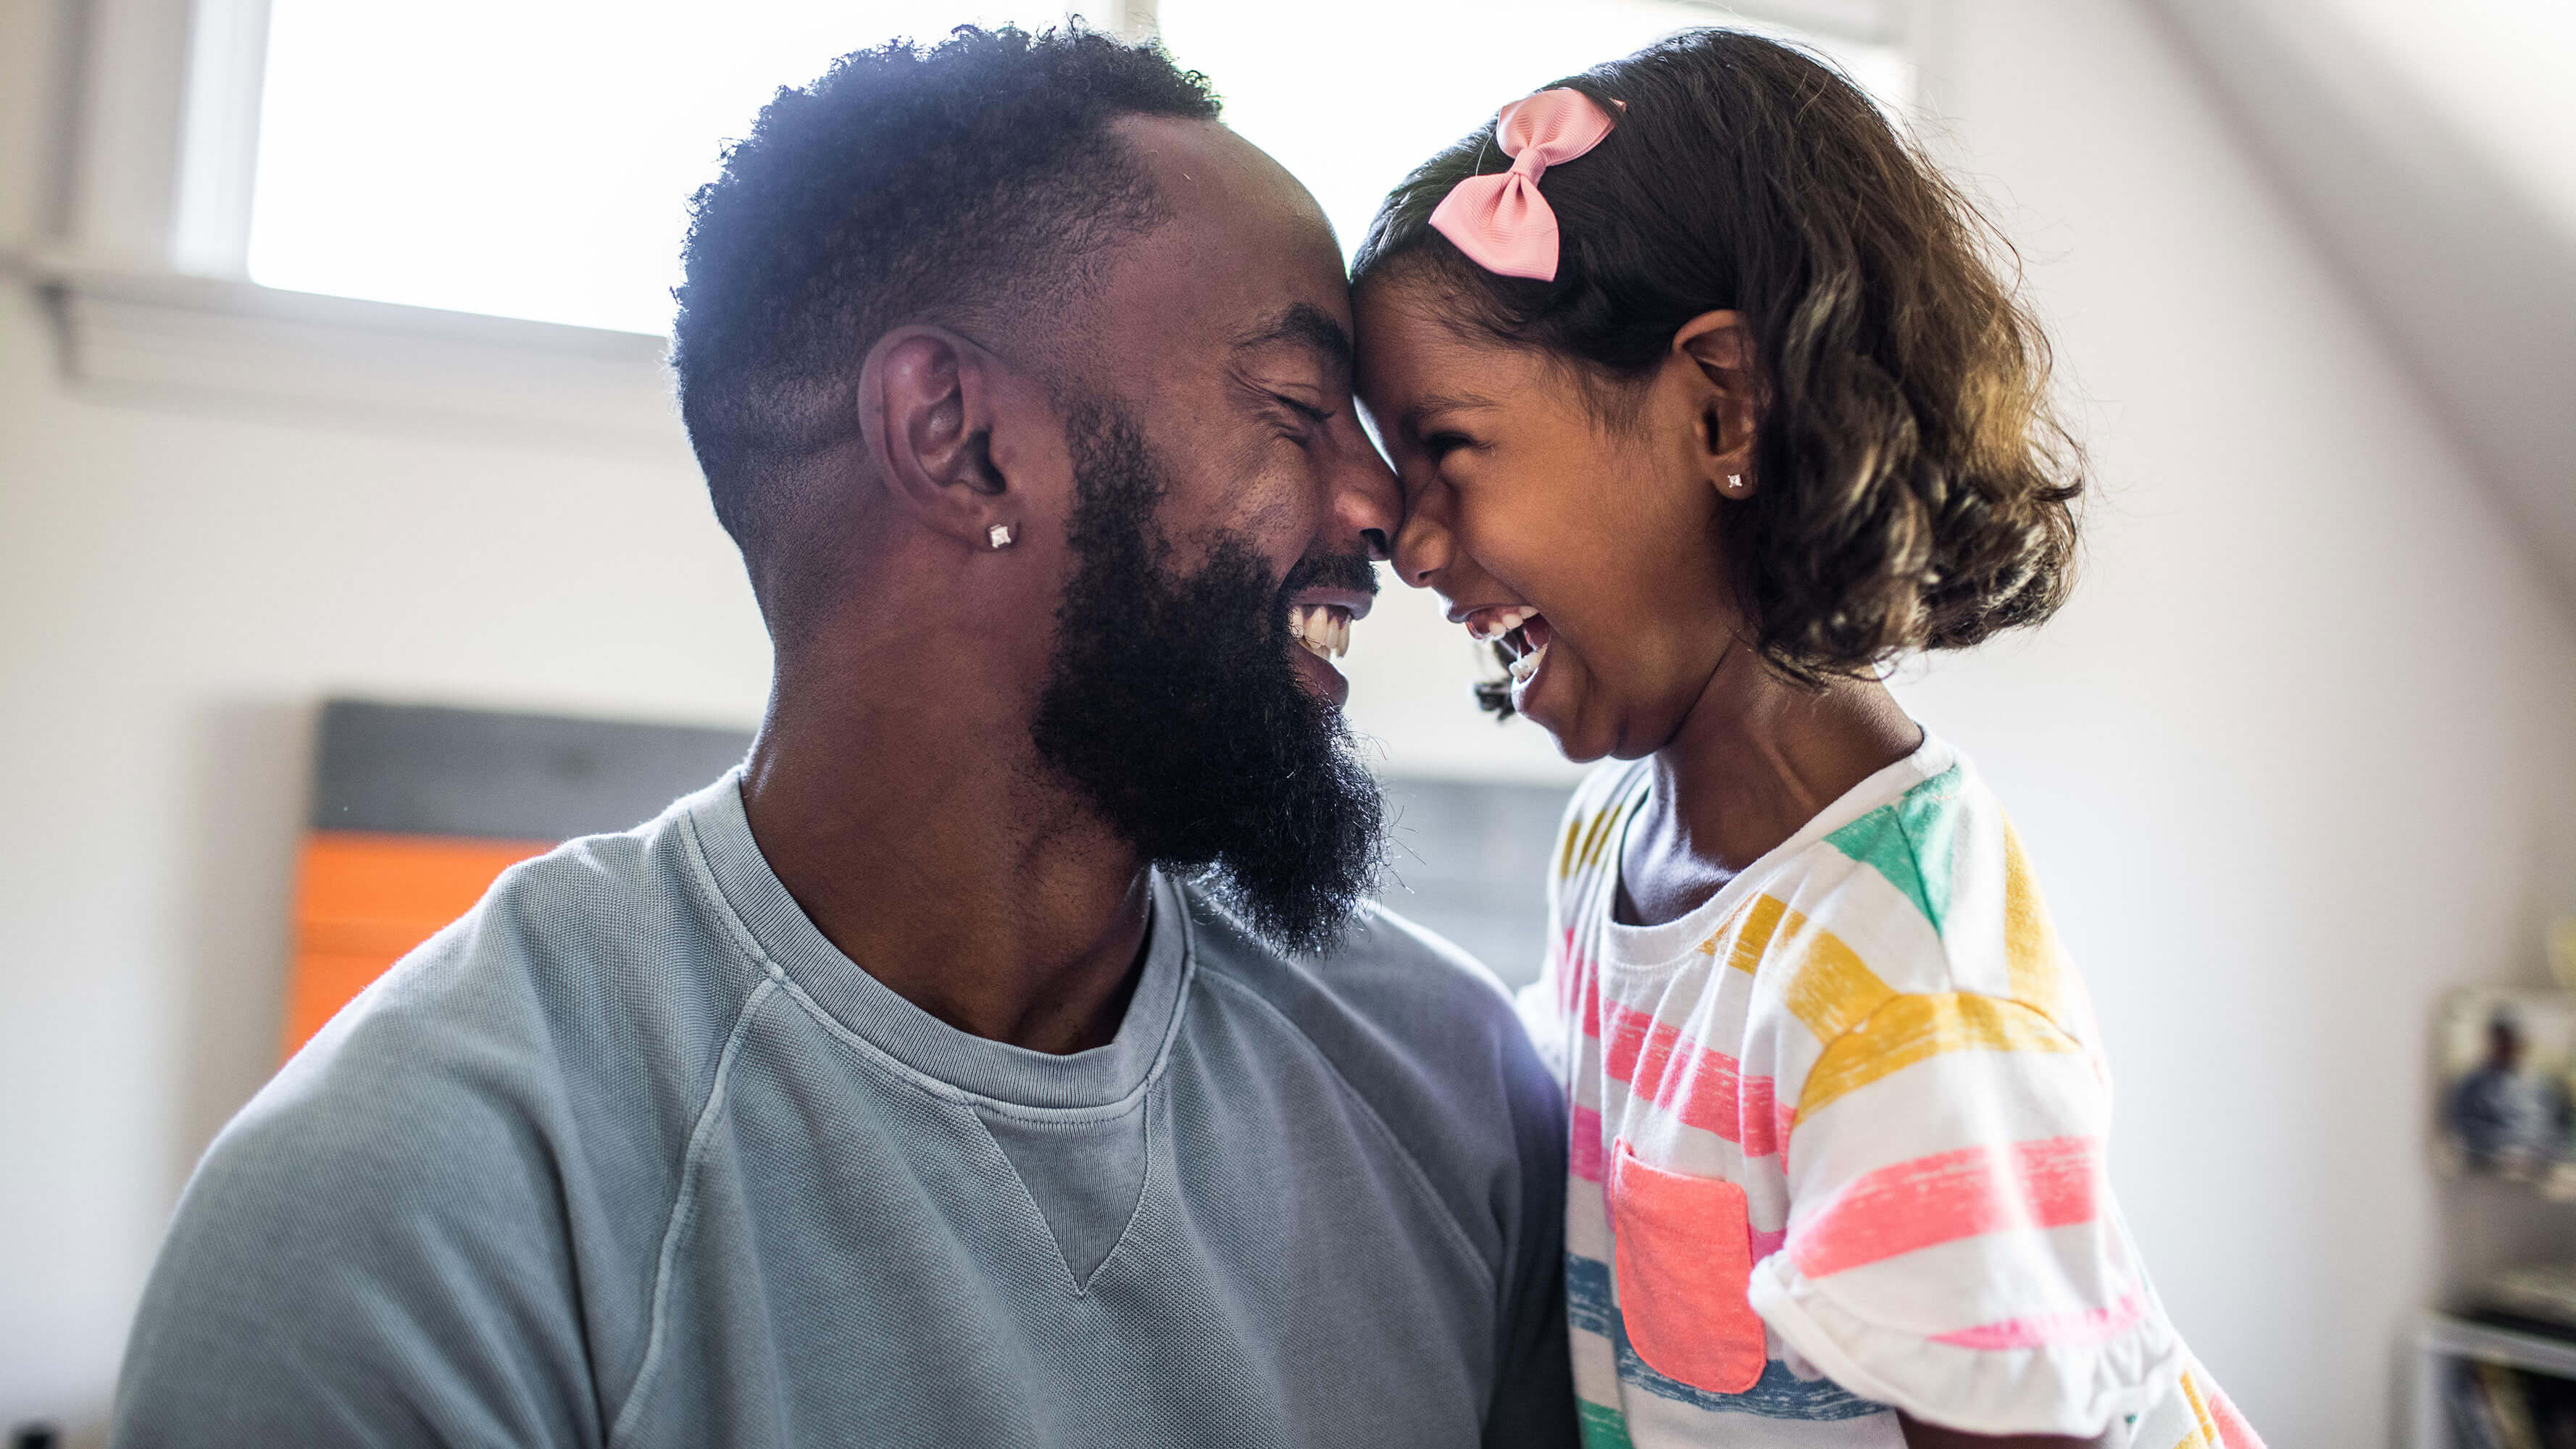 A father and daughter share in a smiling moment in a modern-looking living room.